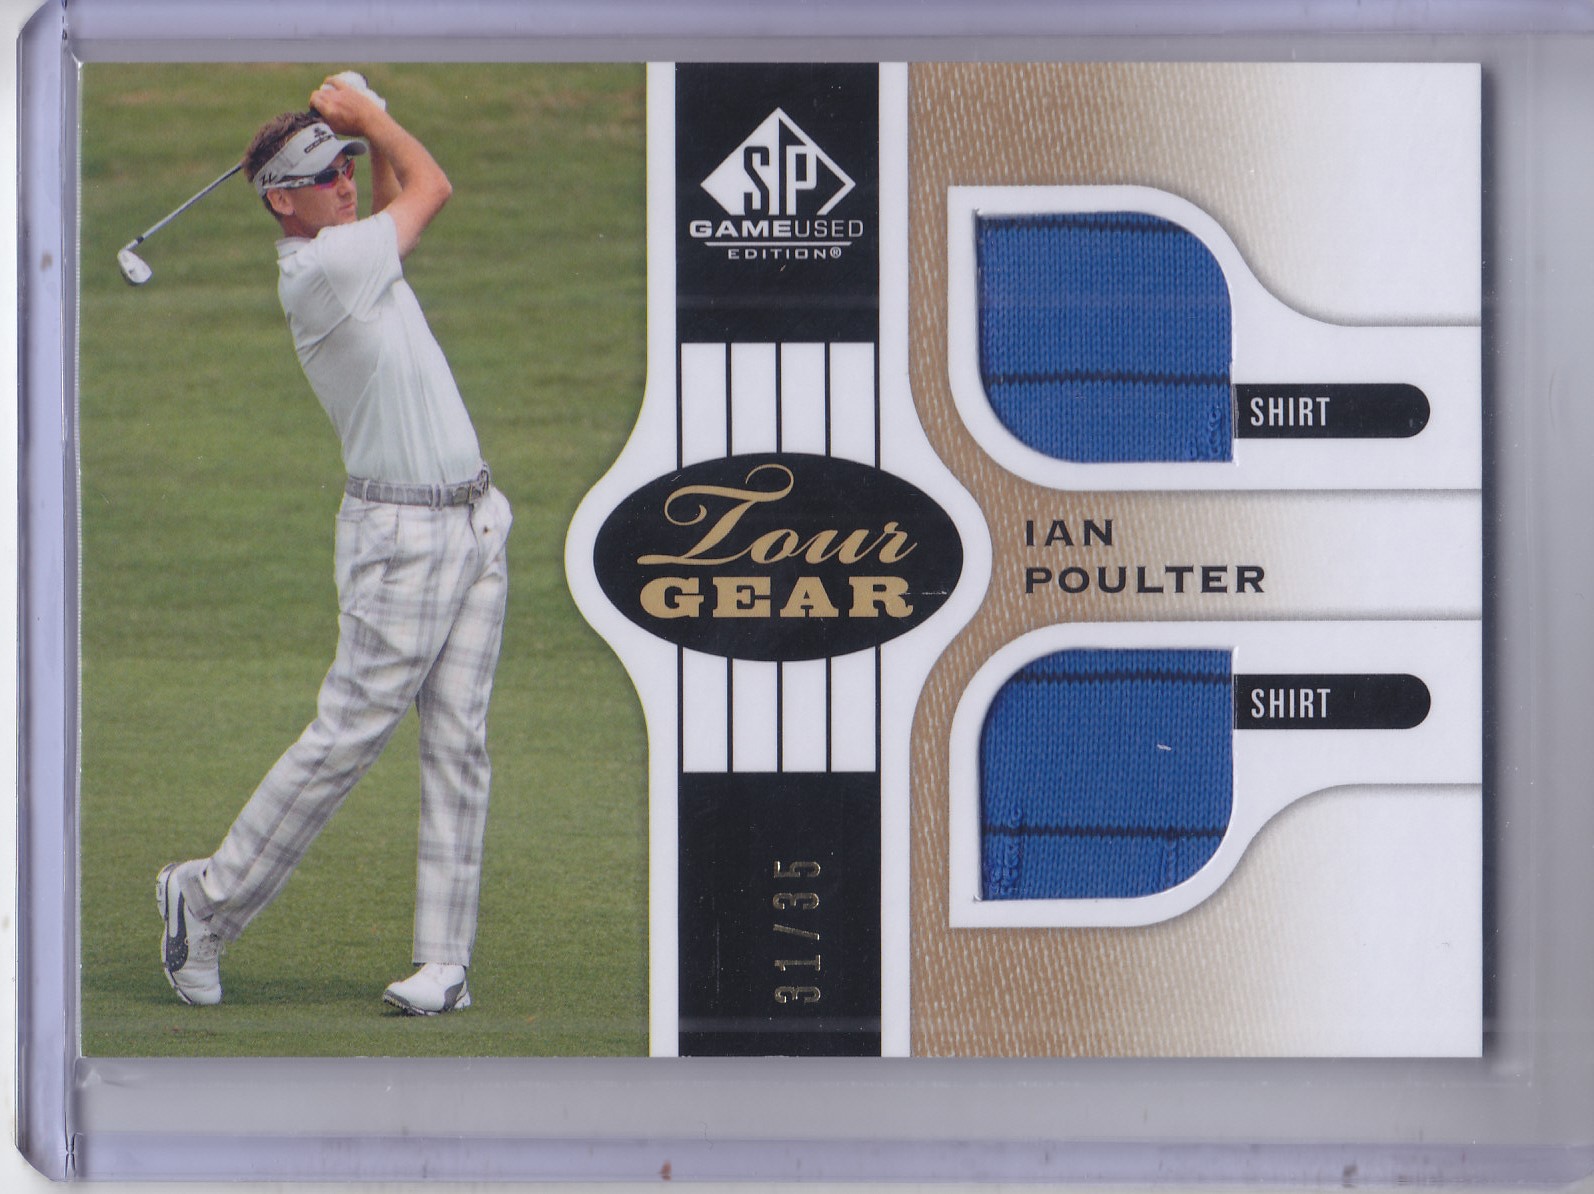  Ian Poulter player image